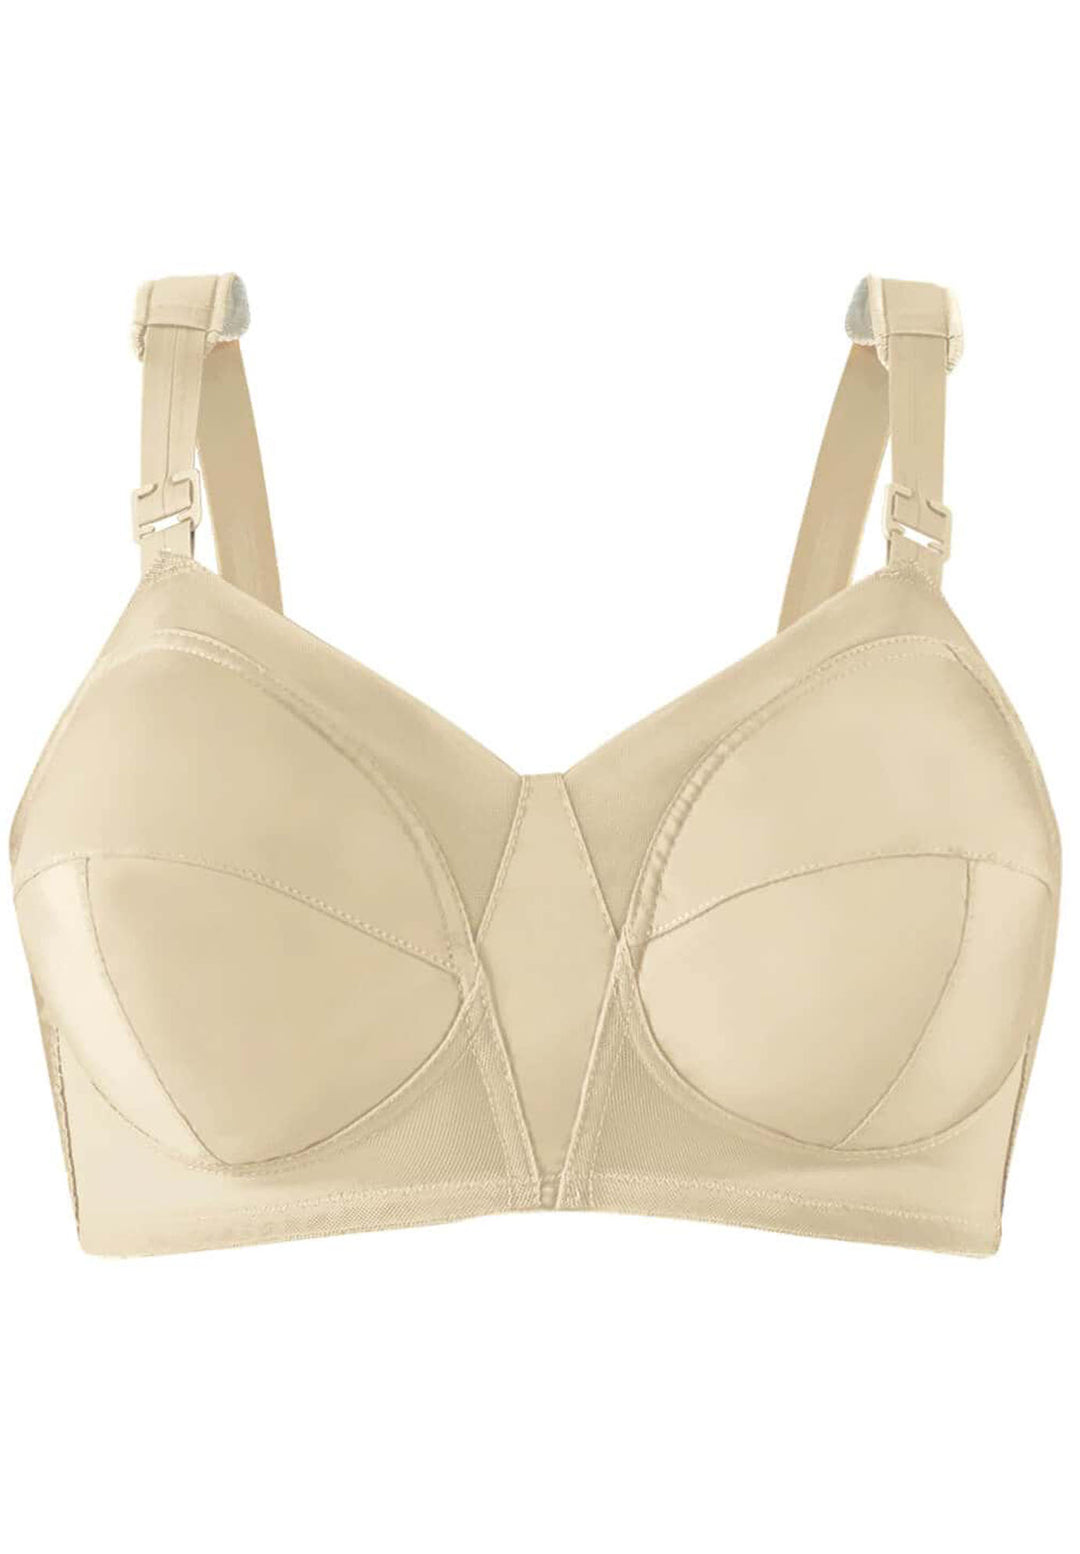 44D Bra Size in Beige by Exquisite Form Full Cup Bras